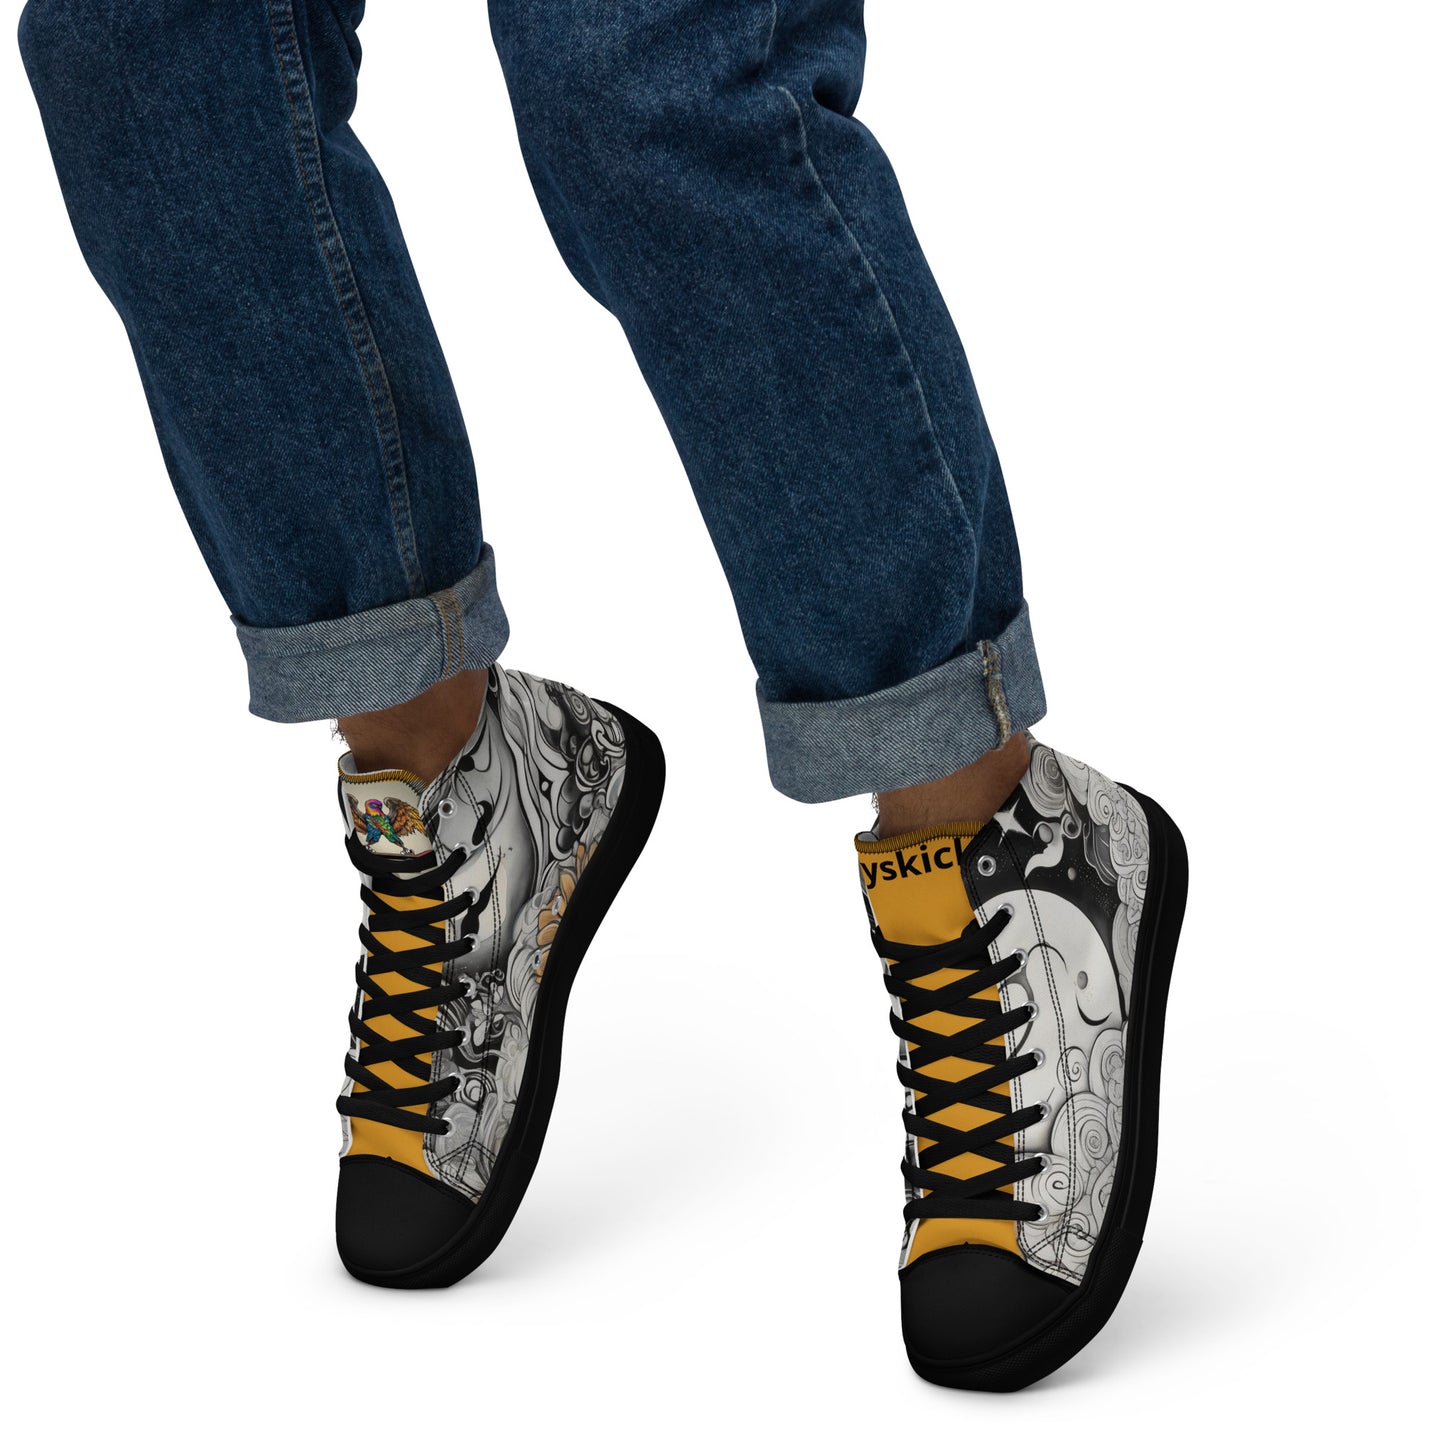 FREE SHIPPING- Men’s high top canvas shoes